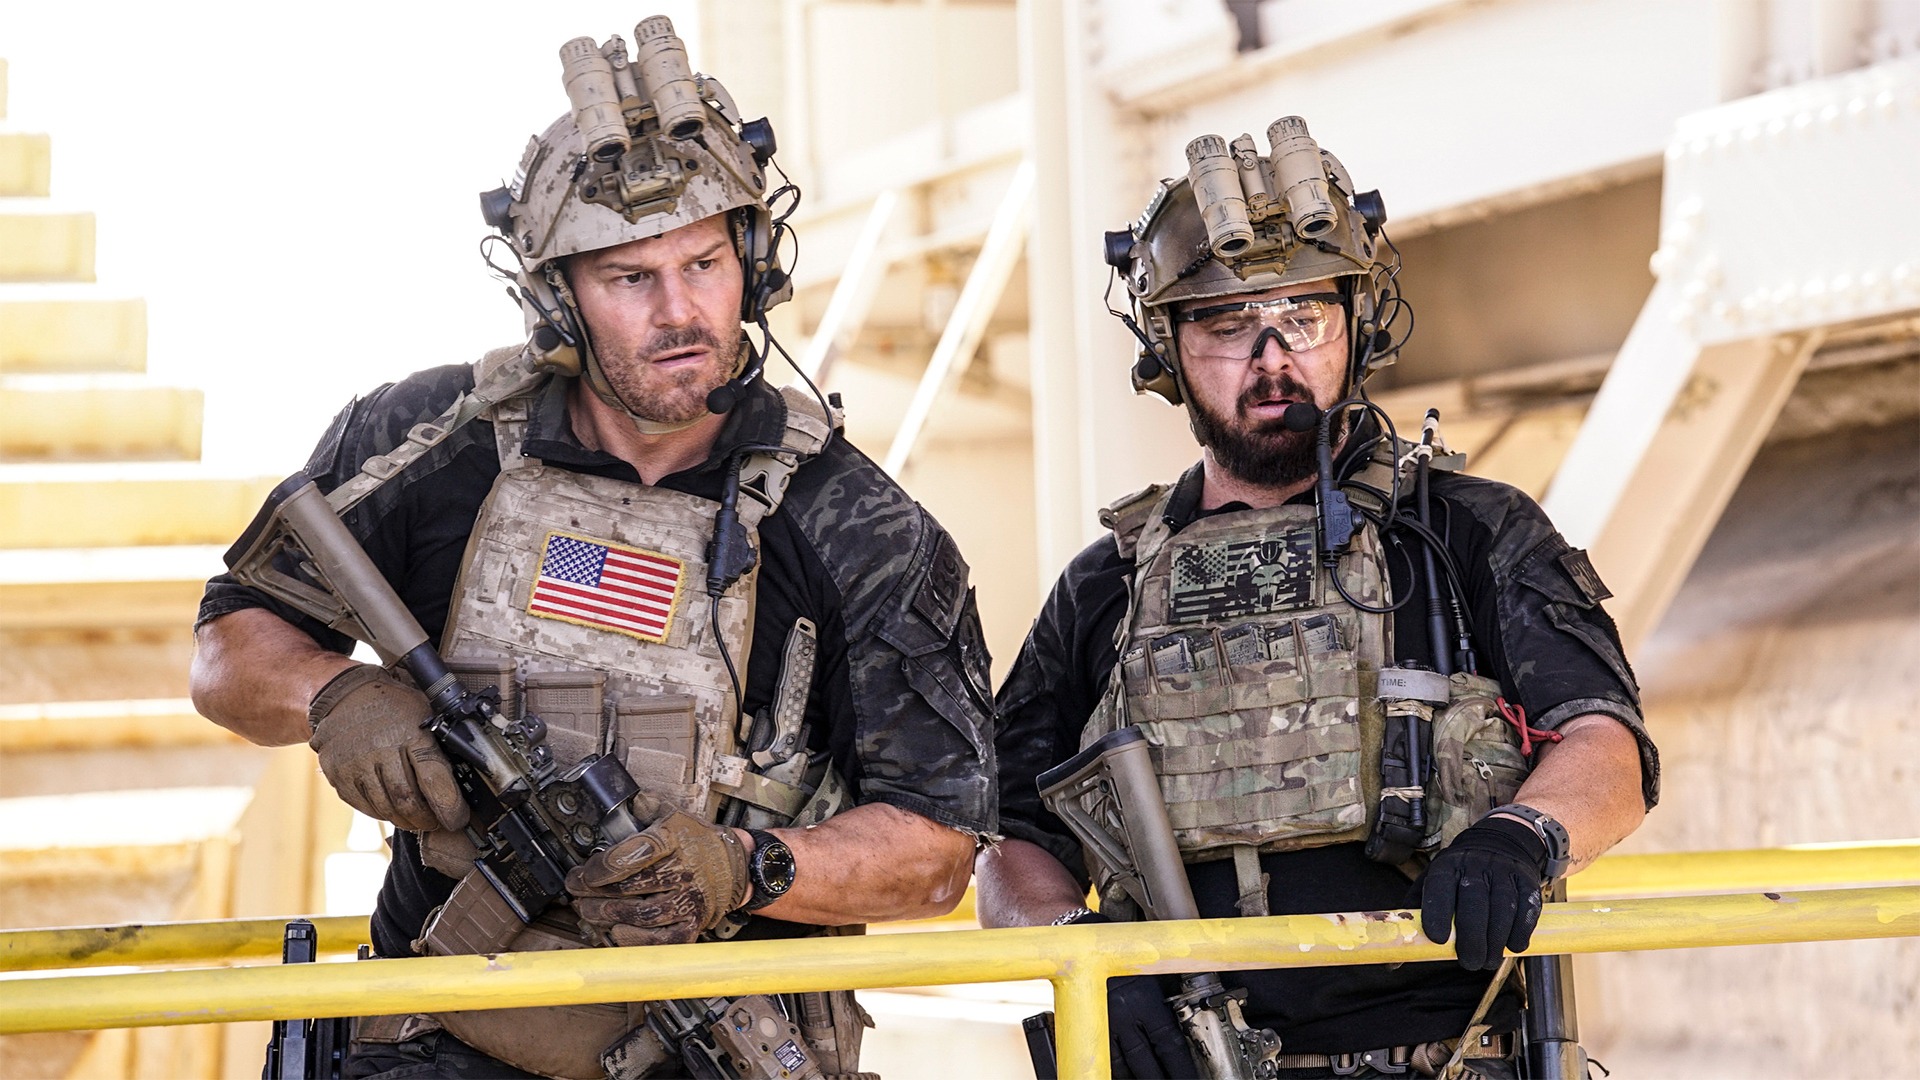 Watch SEAL Team Season 2 Episode 1 Fracture Full show on CBS